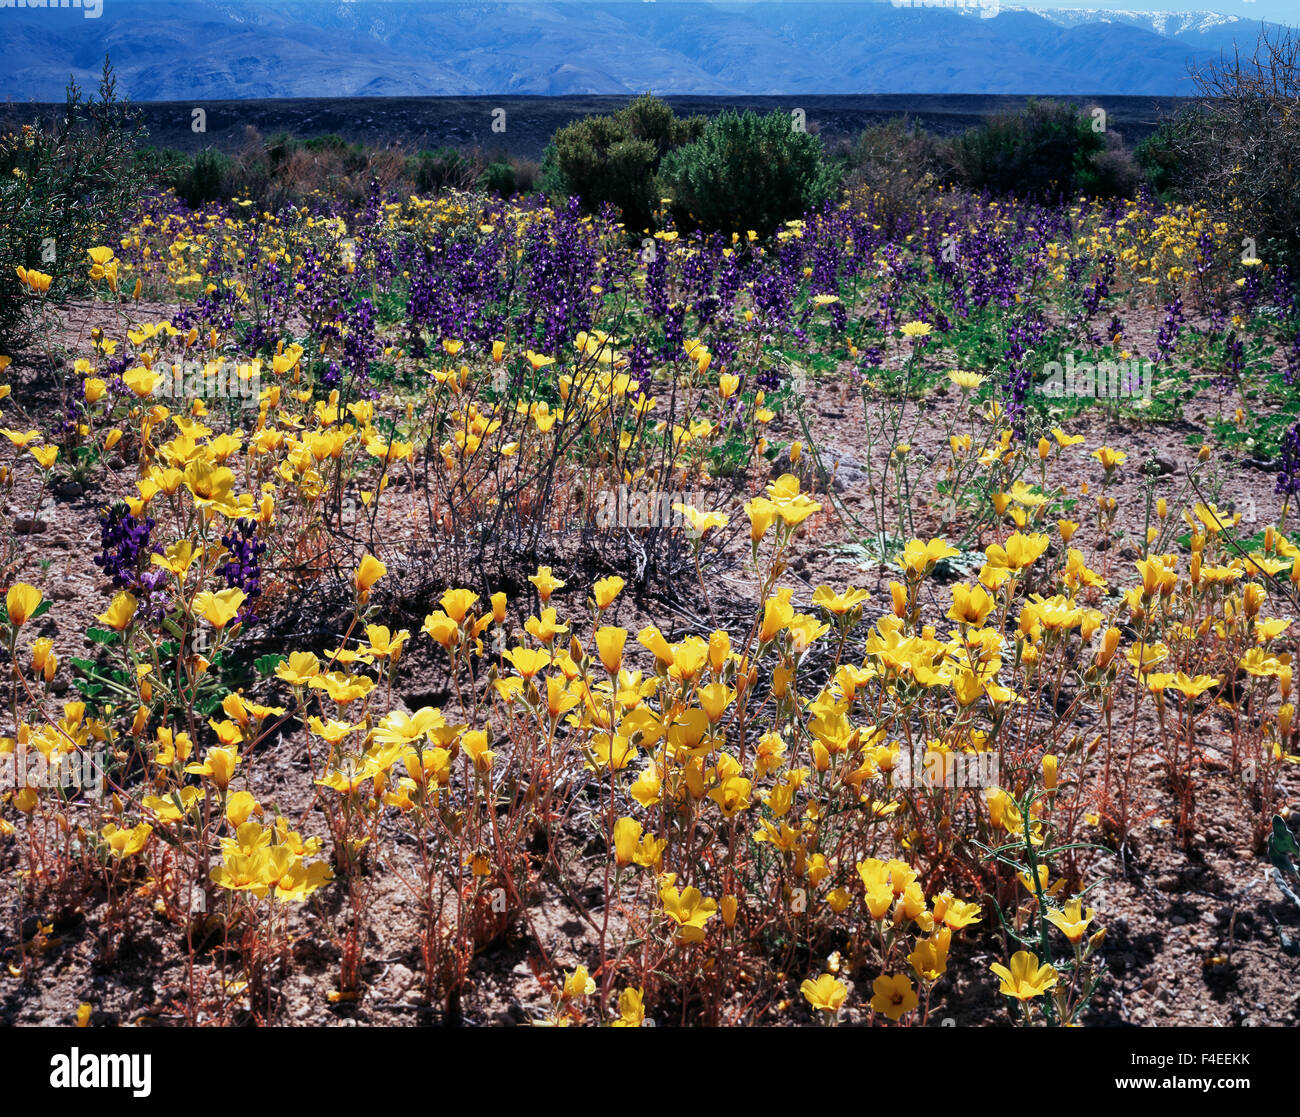 California, Owens Valley, A field of Sun cups wildflowers (Camissonia brevipes ) below the White Mountains. (Large format sizes available) Stock Photo